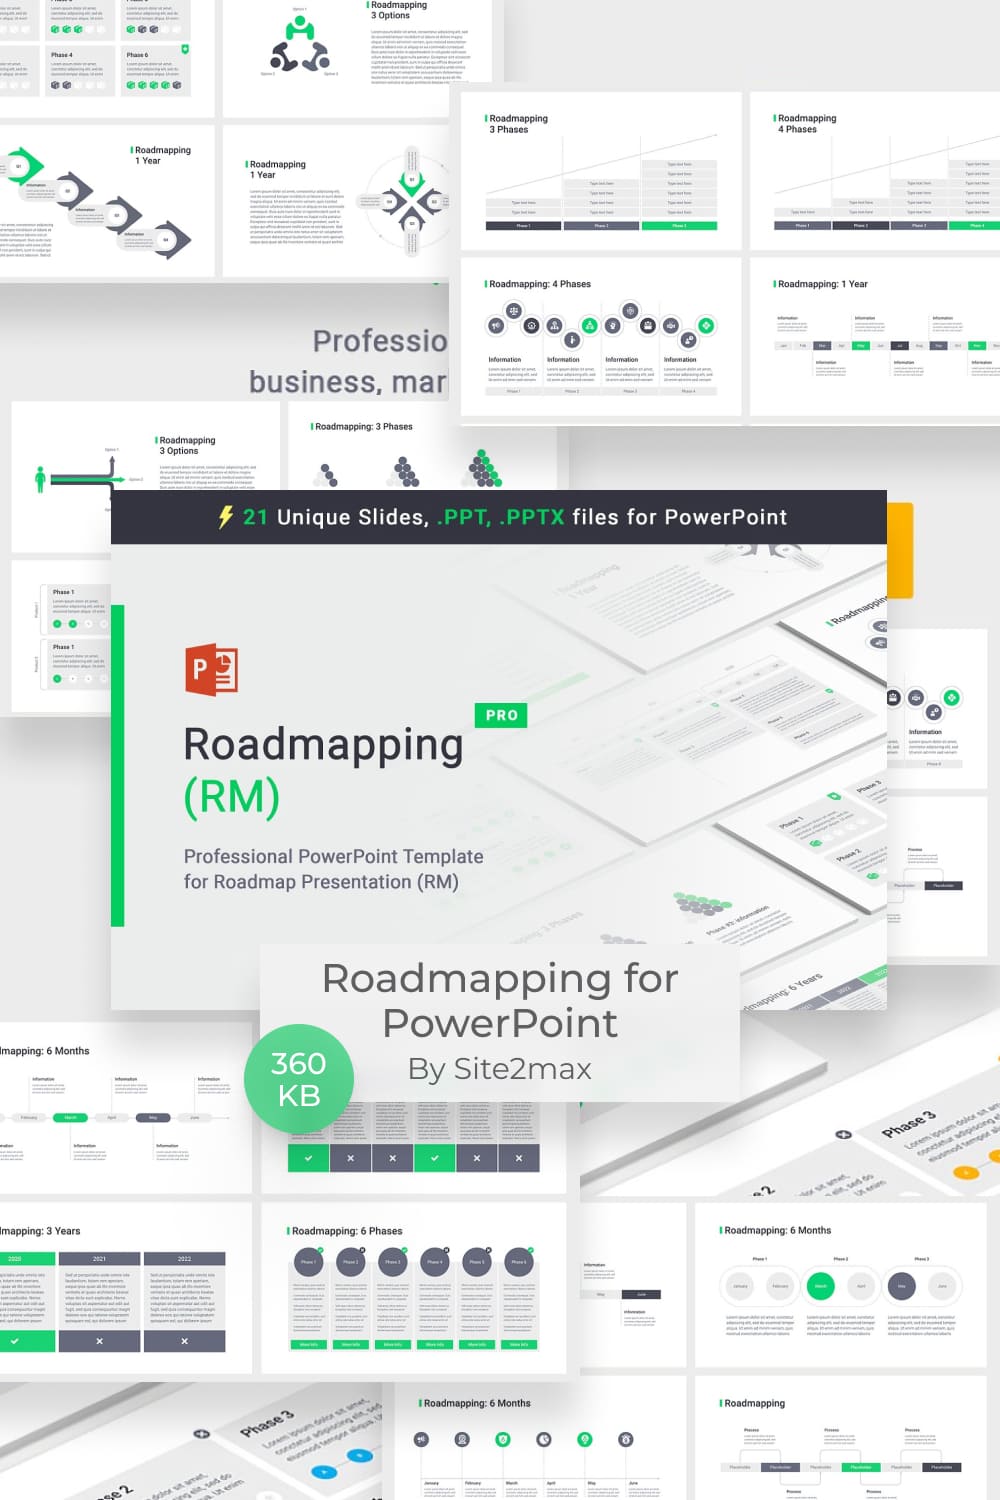 Roadmapping for PowerPoint by MasterBundles Pinterest Collage Image.